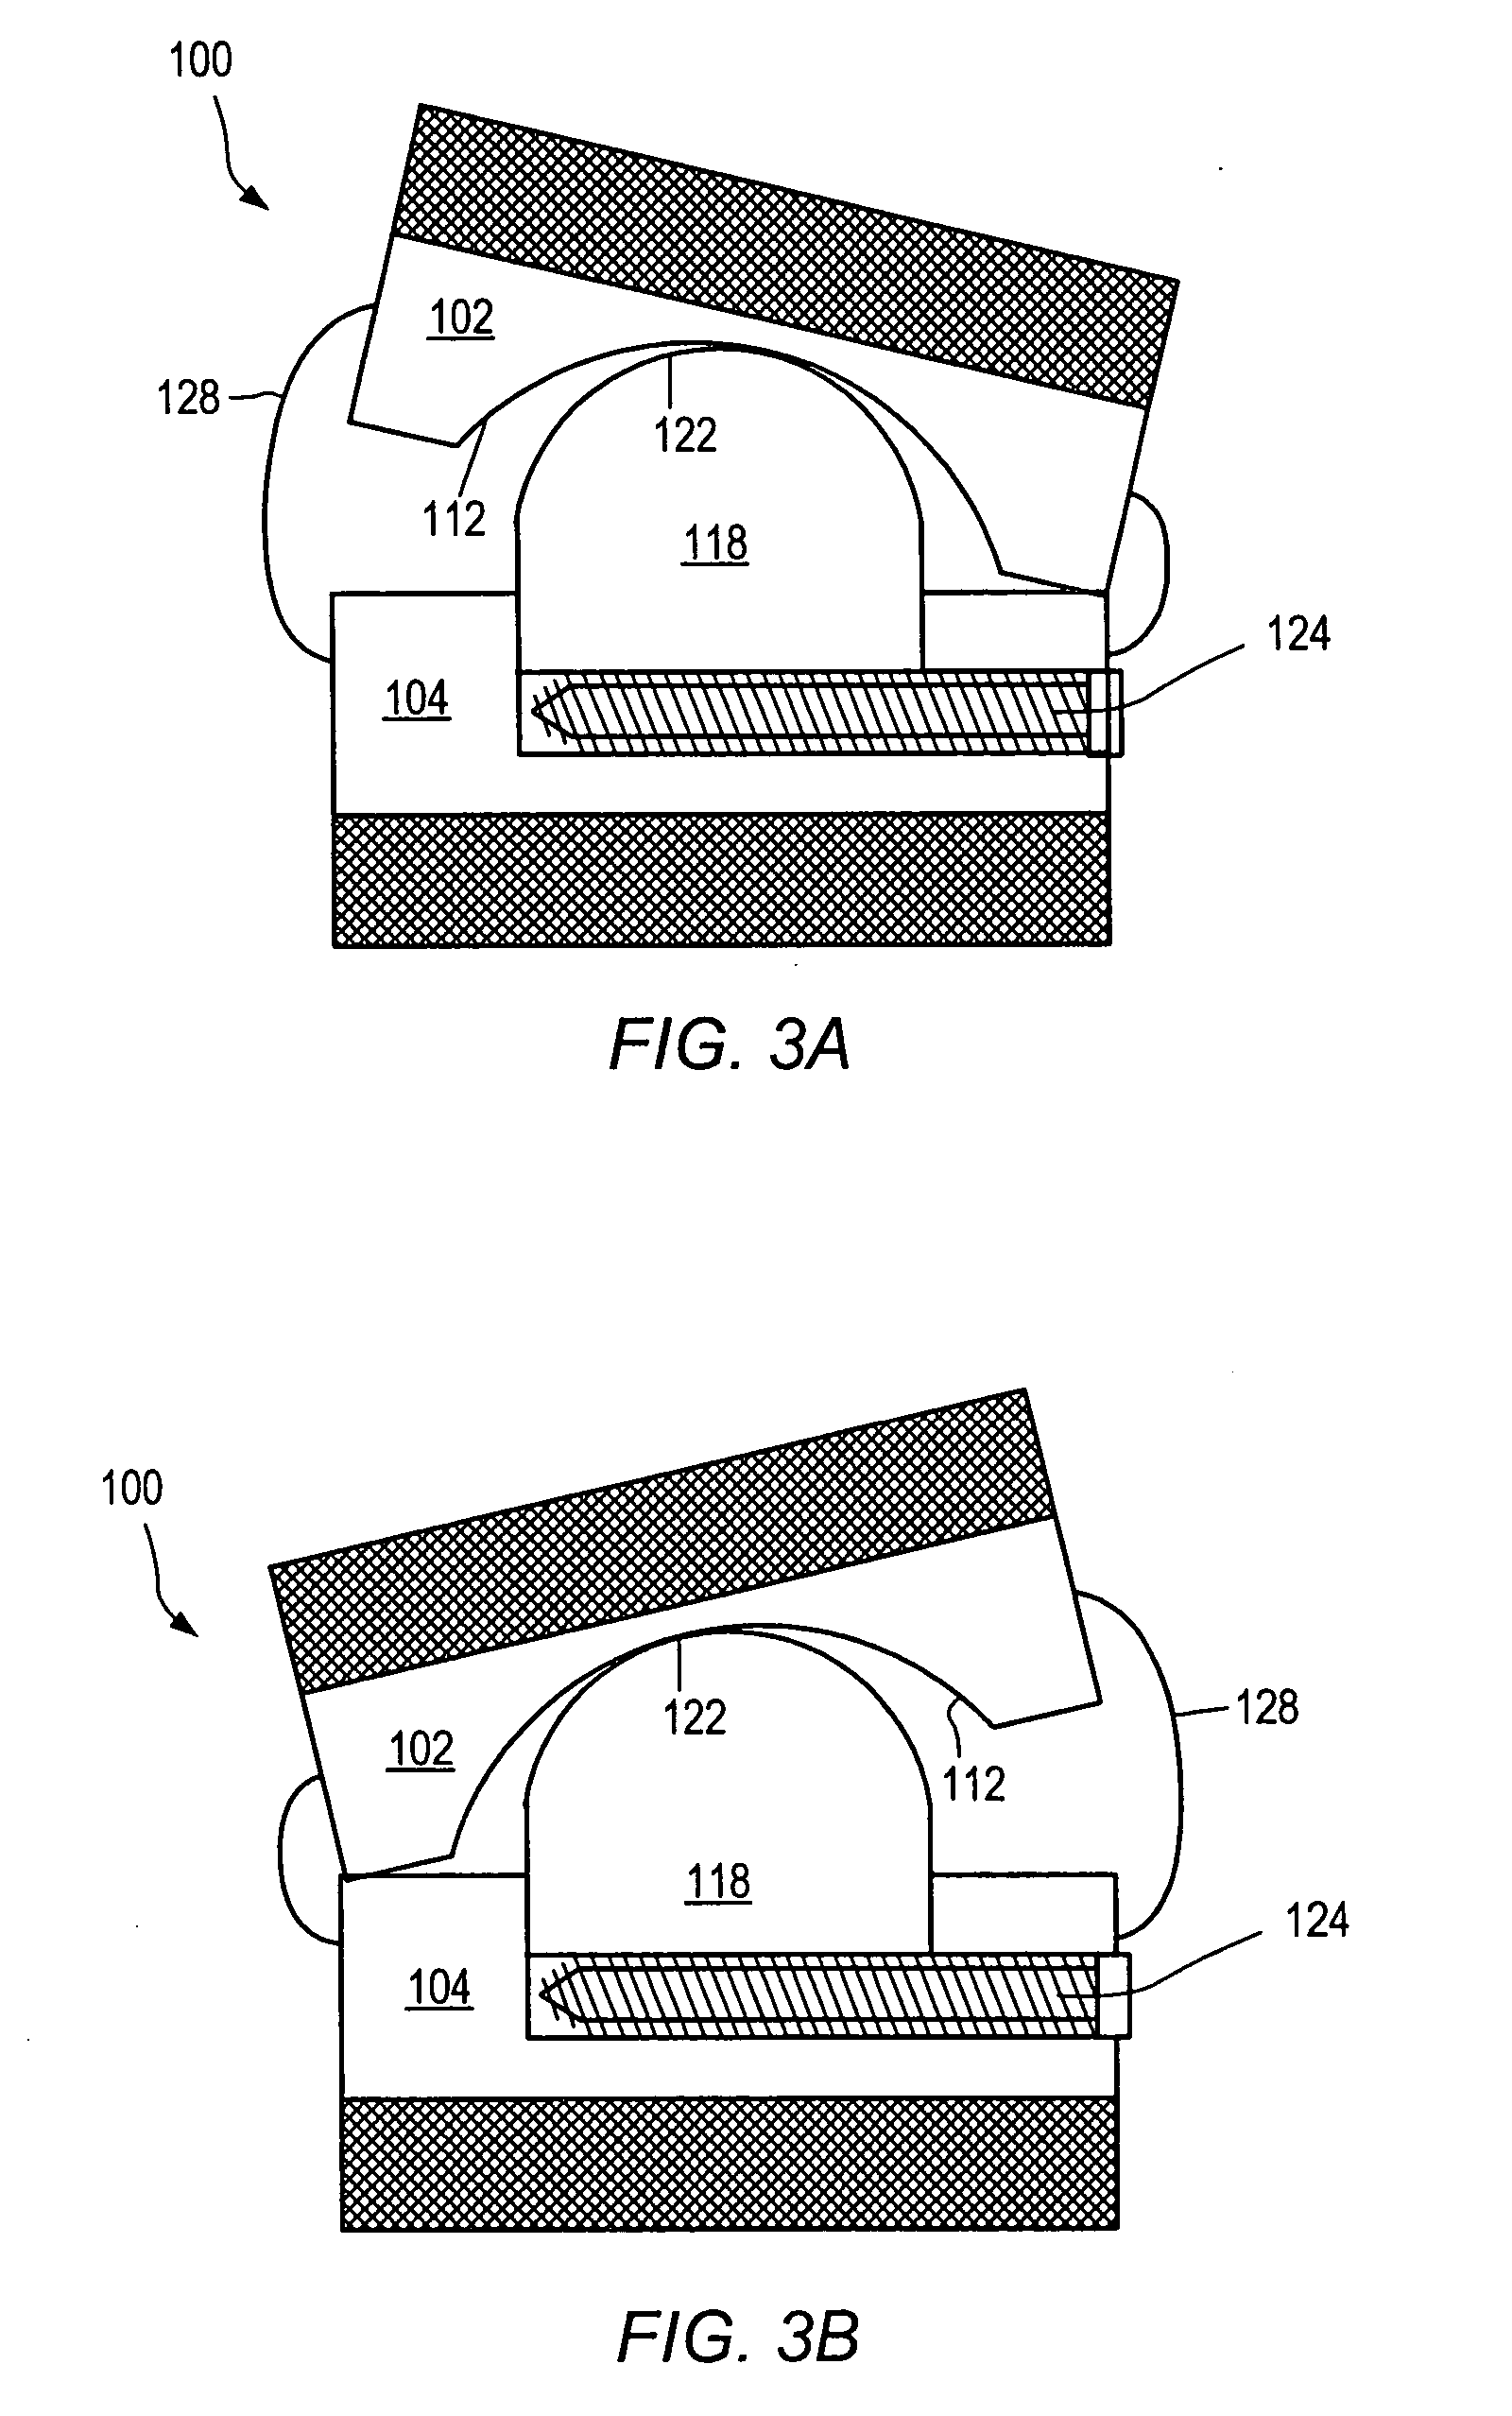 Expandable articulating intervertebral implant with cam